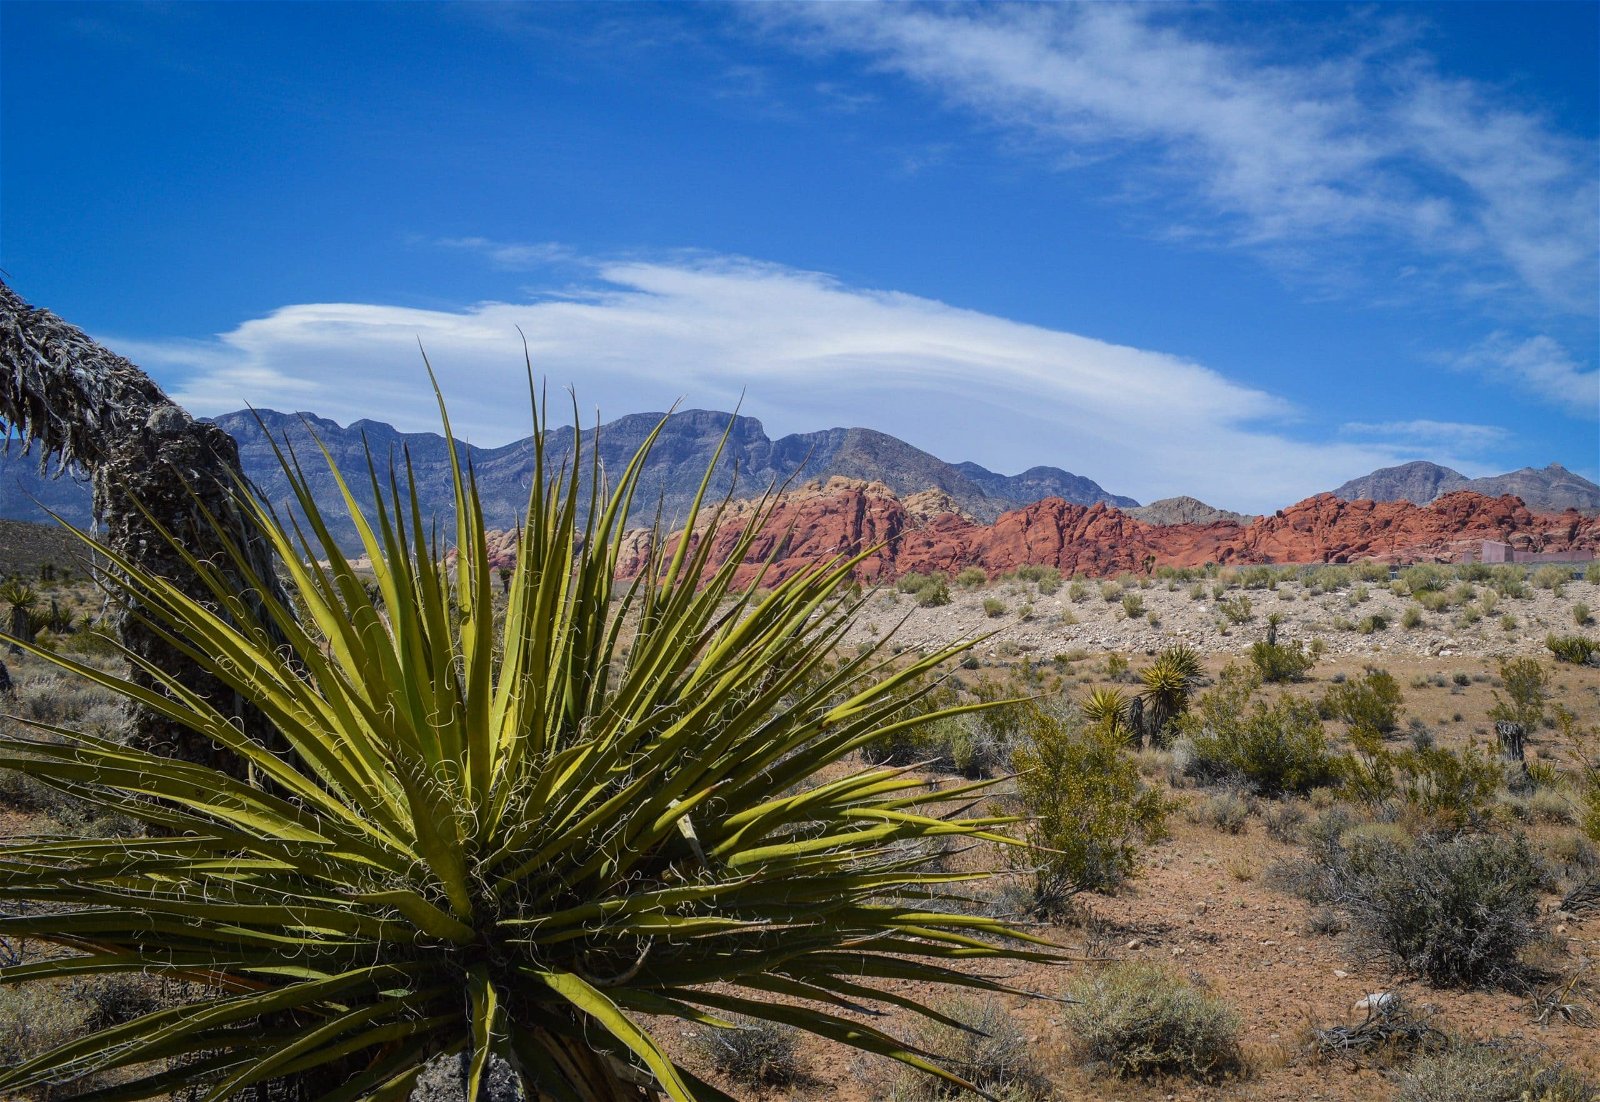 red rock canyon just outside of Las Vegas has a scenic road so you can sightsee from your car